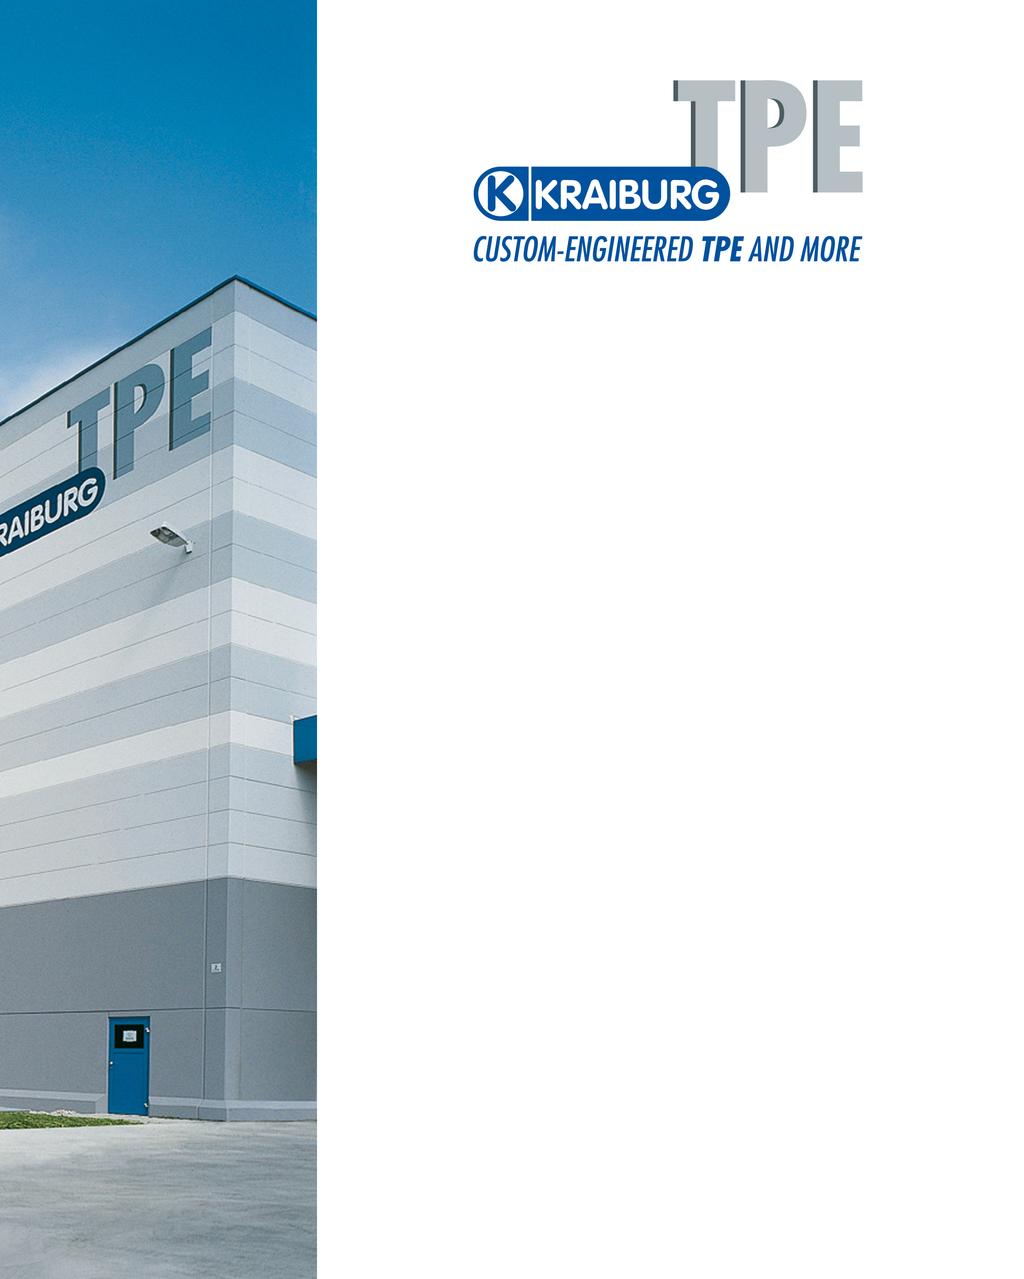 KRAIBURG TPE is a specialist in thermoplastic elastomer compounds (TPE), providing clients with customized products and solutions that specifically cater to their individual needs.